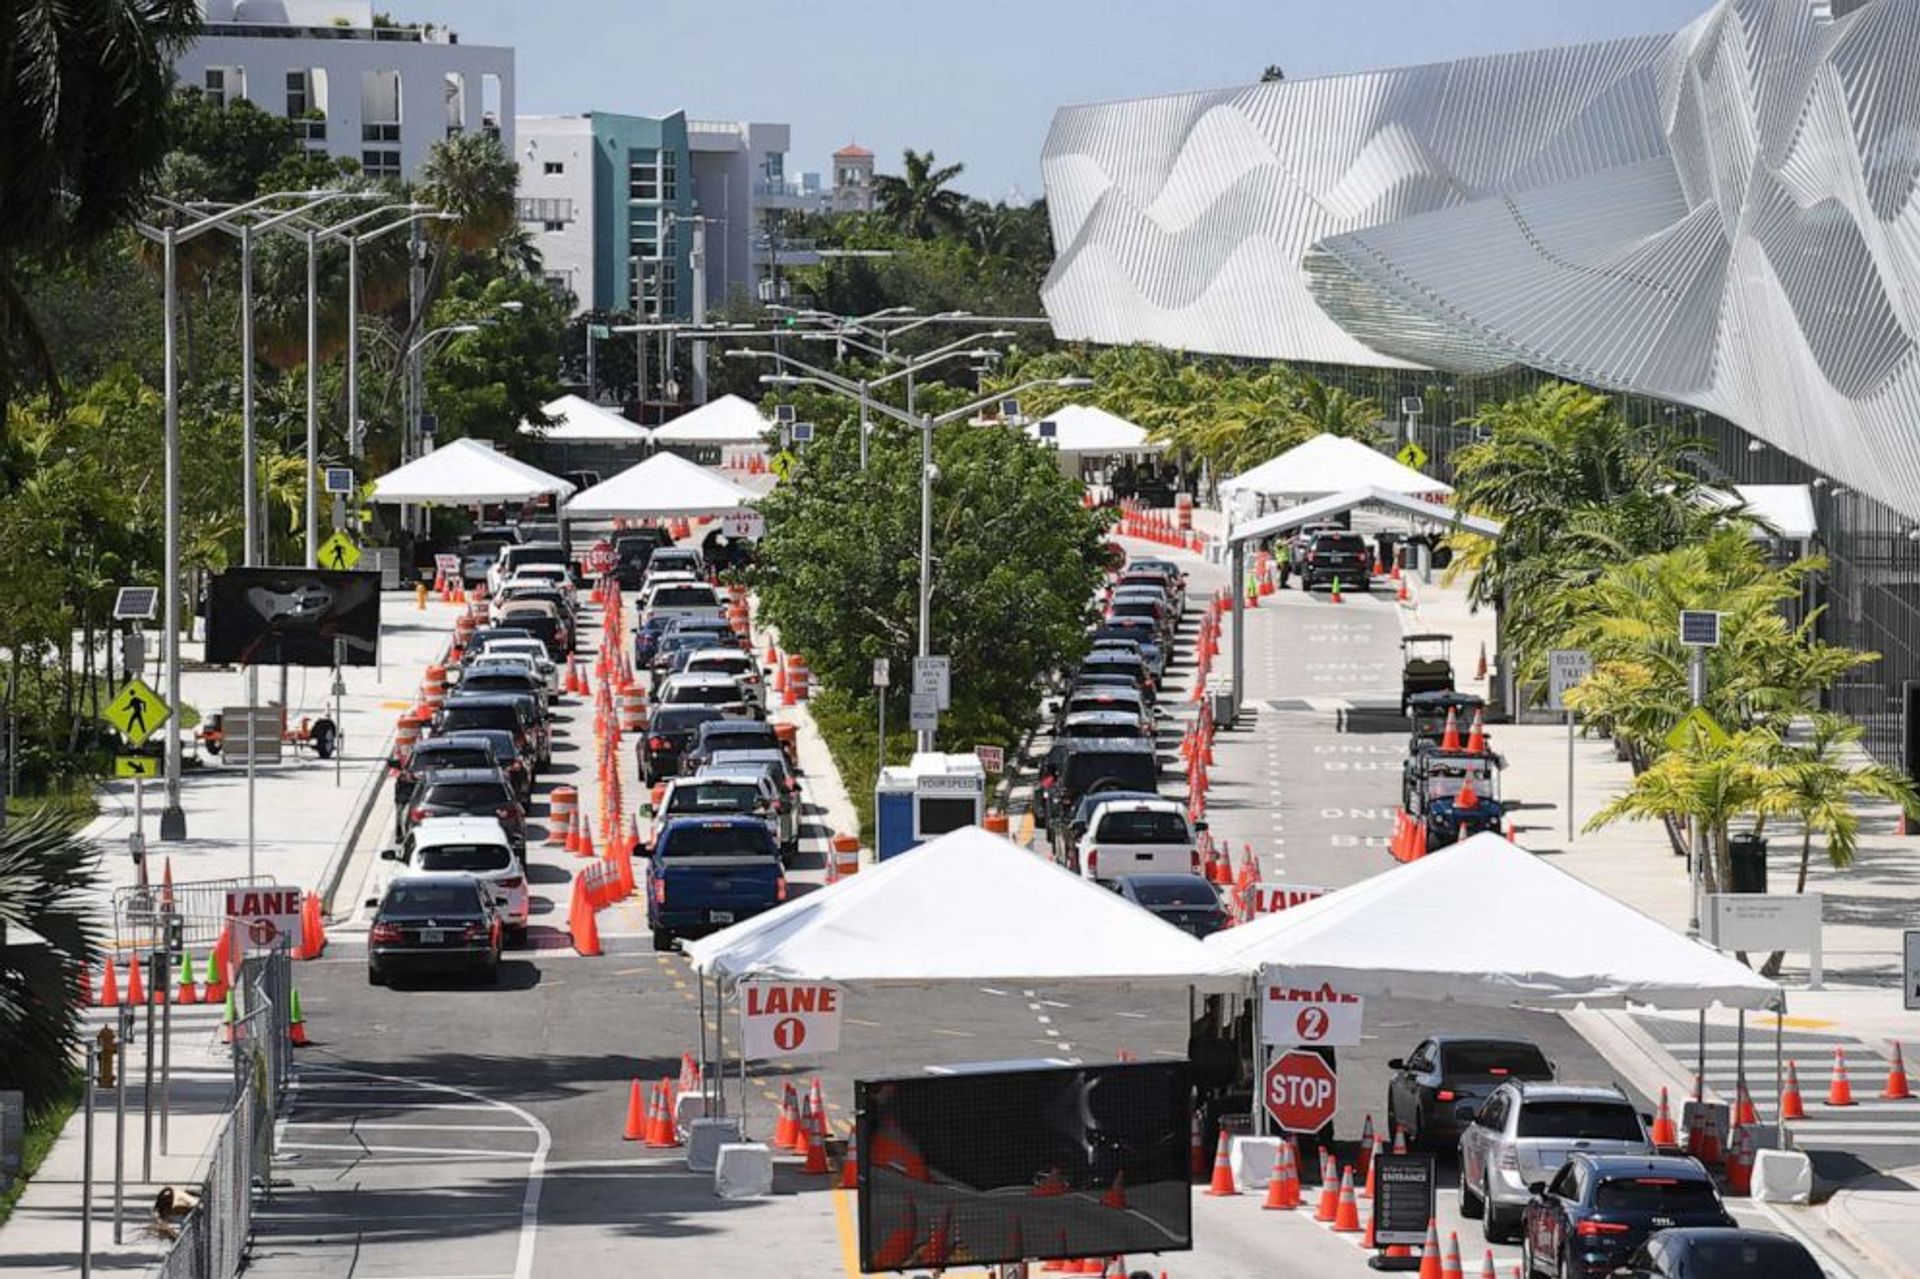 Cars wait in line at the coronavirus drive-in testing site, set up at the Miami Beach Convention Center in Miami Beach. Larry Marano/Shutterstock